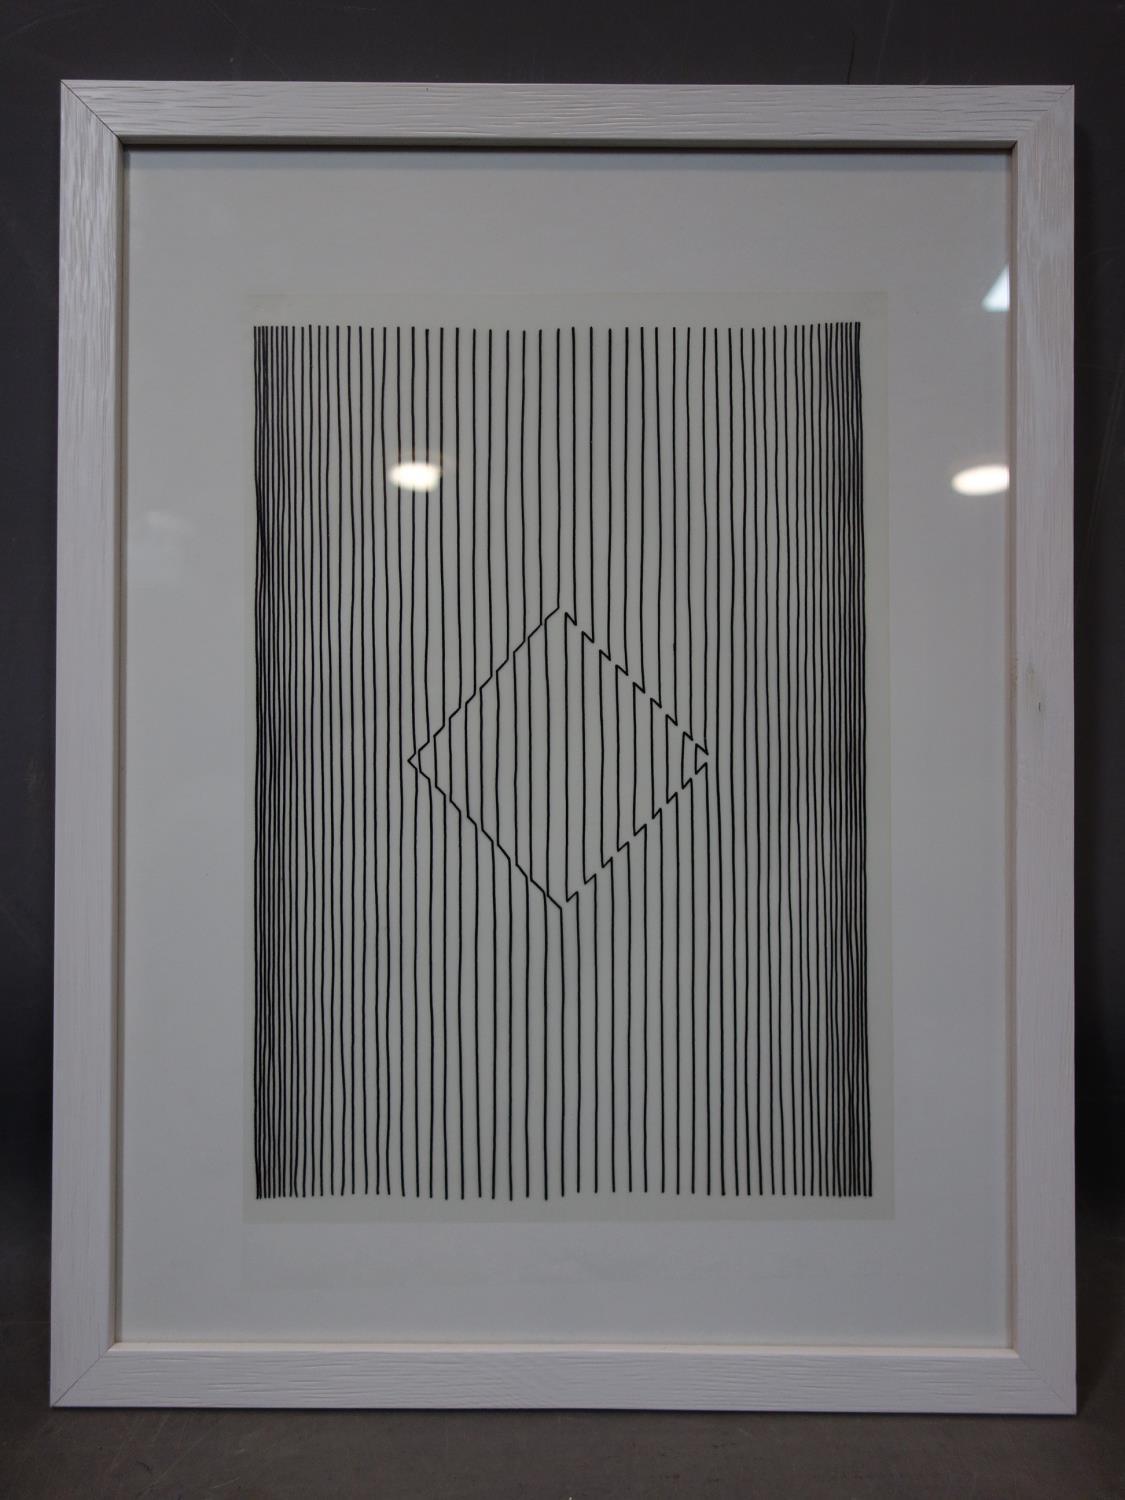 After Victor Vasarely, 'Naissances, 1973, printed line etching after a drawing on tracing paper, - Image 2 of 2